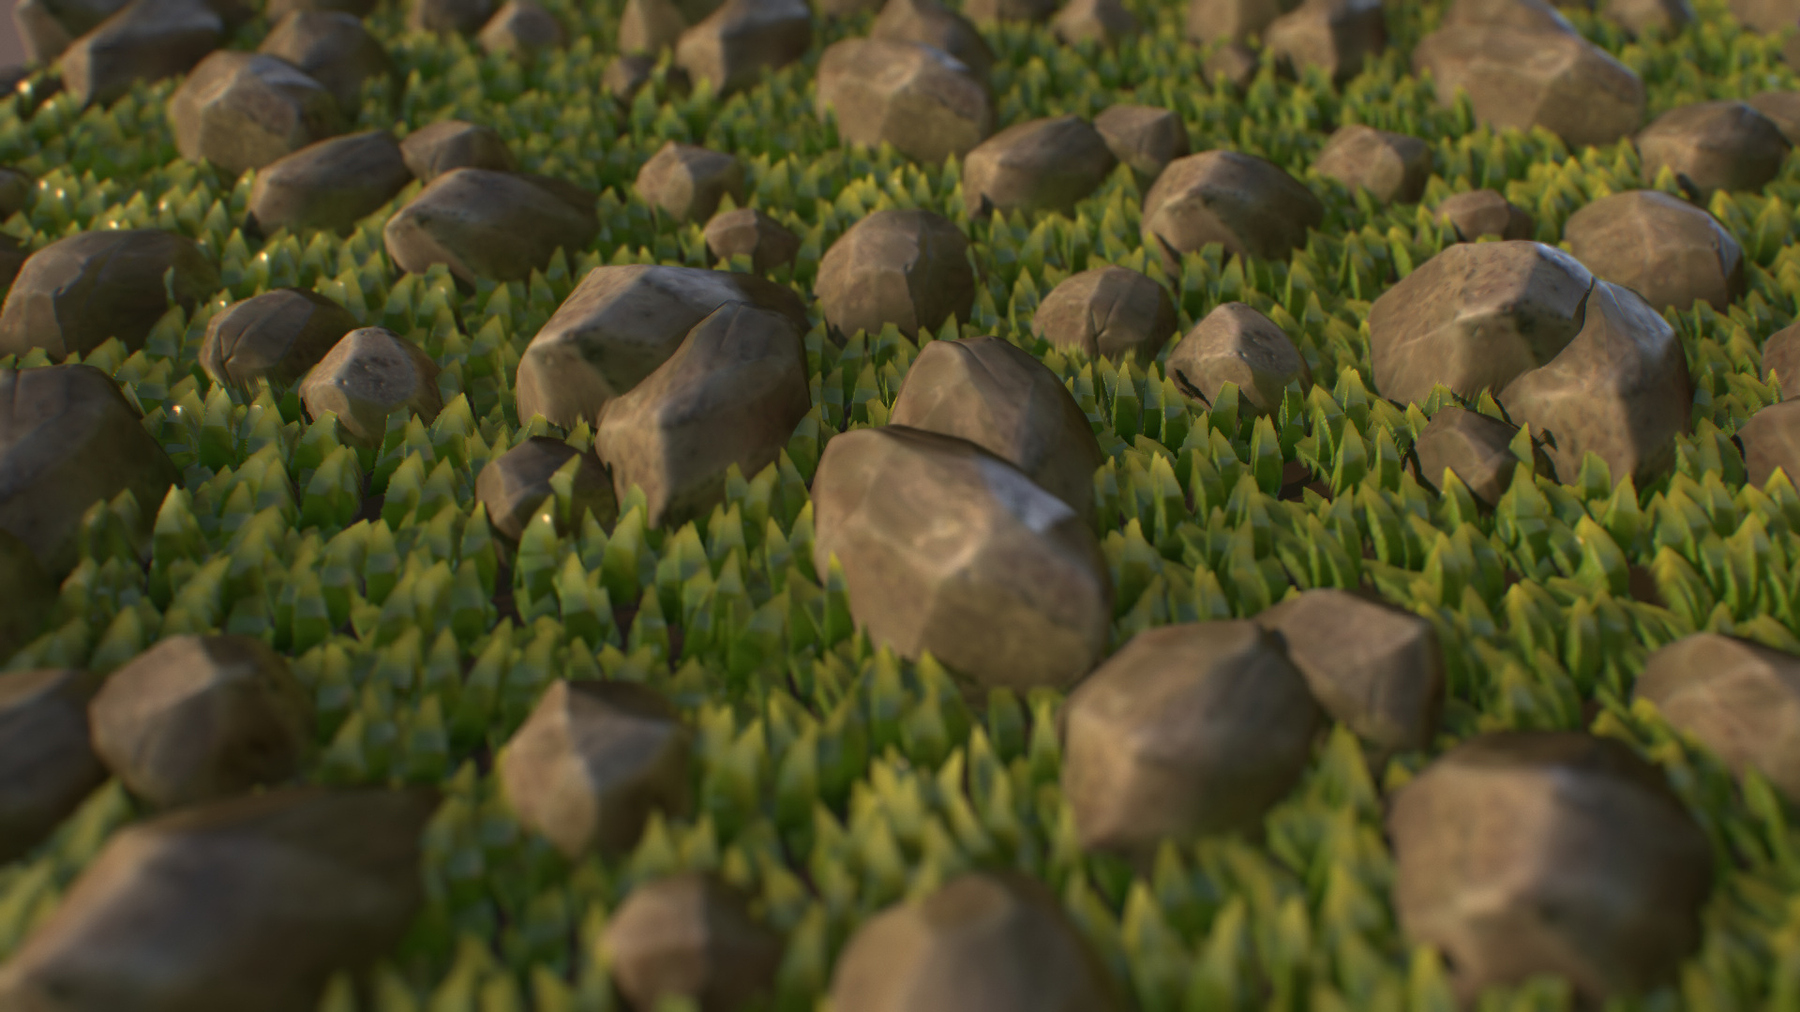 creating realistic tileable textures in zbrush